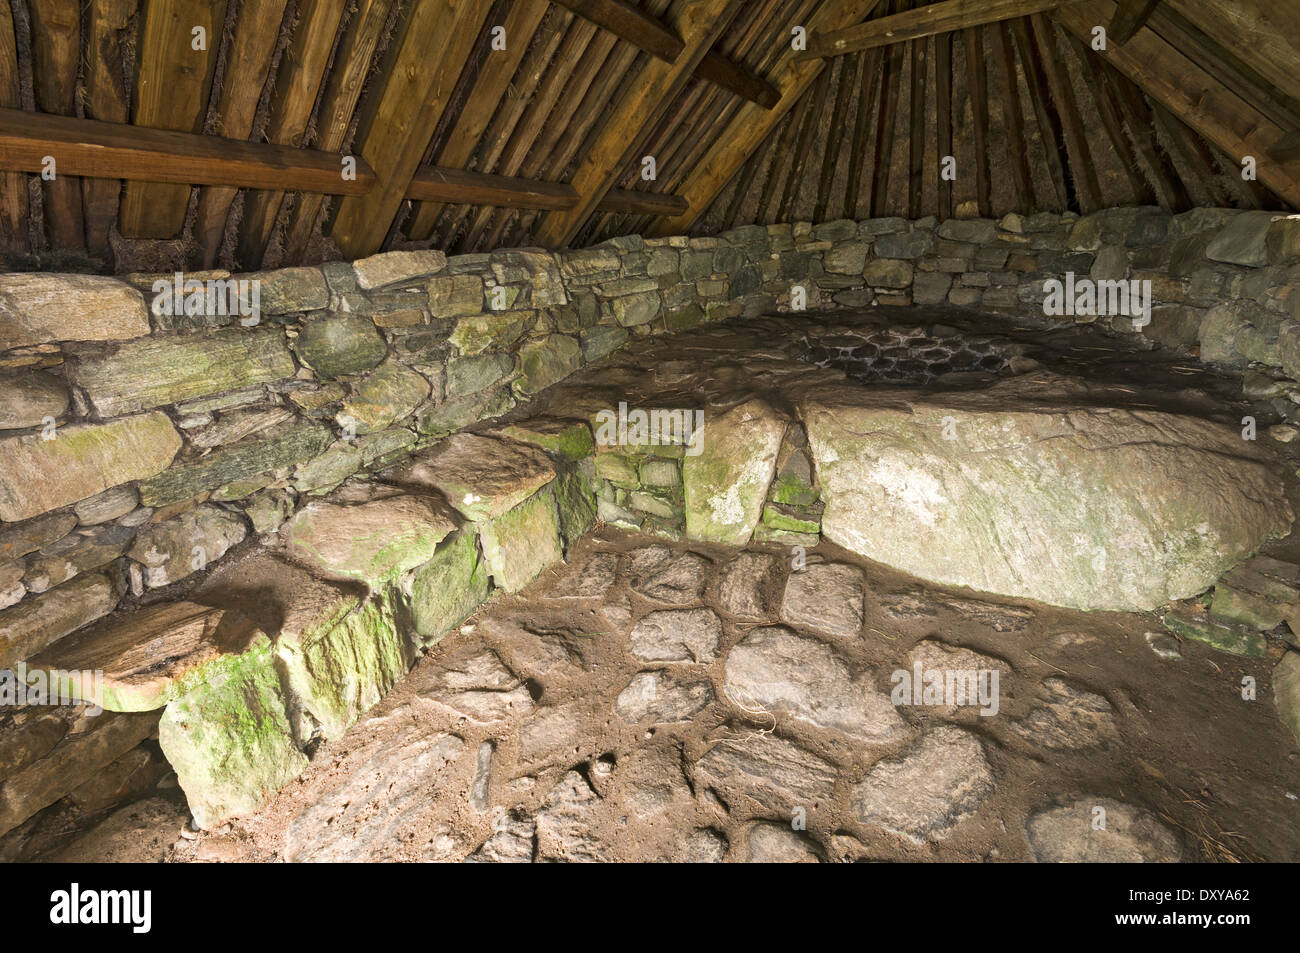 Interior of the reconstructed Iron Age Norse Kiln at Shawbost, Lewis, Western Isles, Scotland, UK. Stock Photo